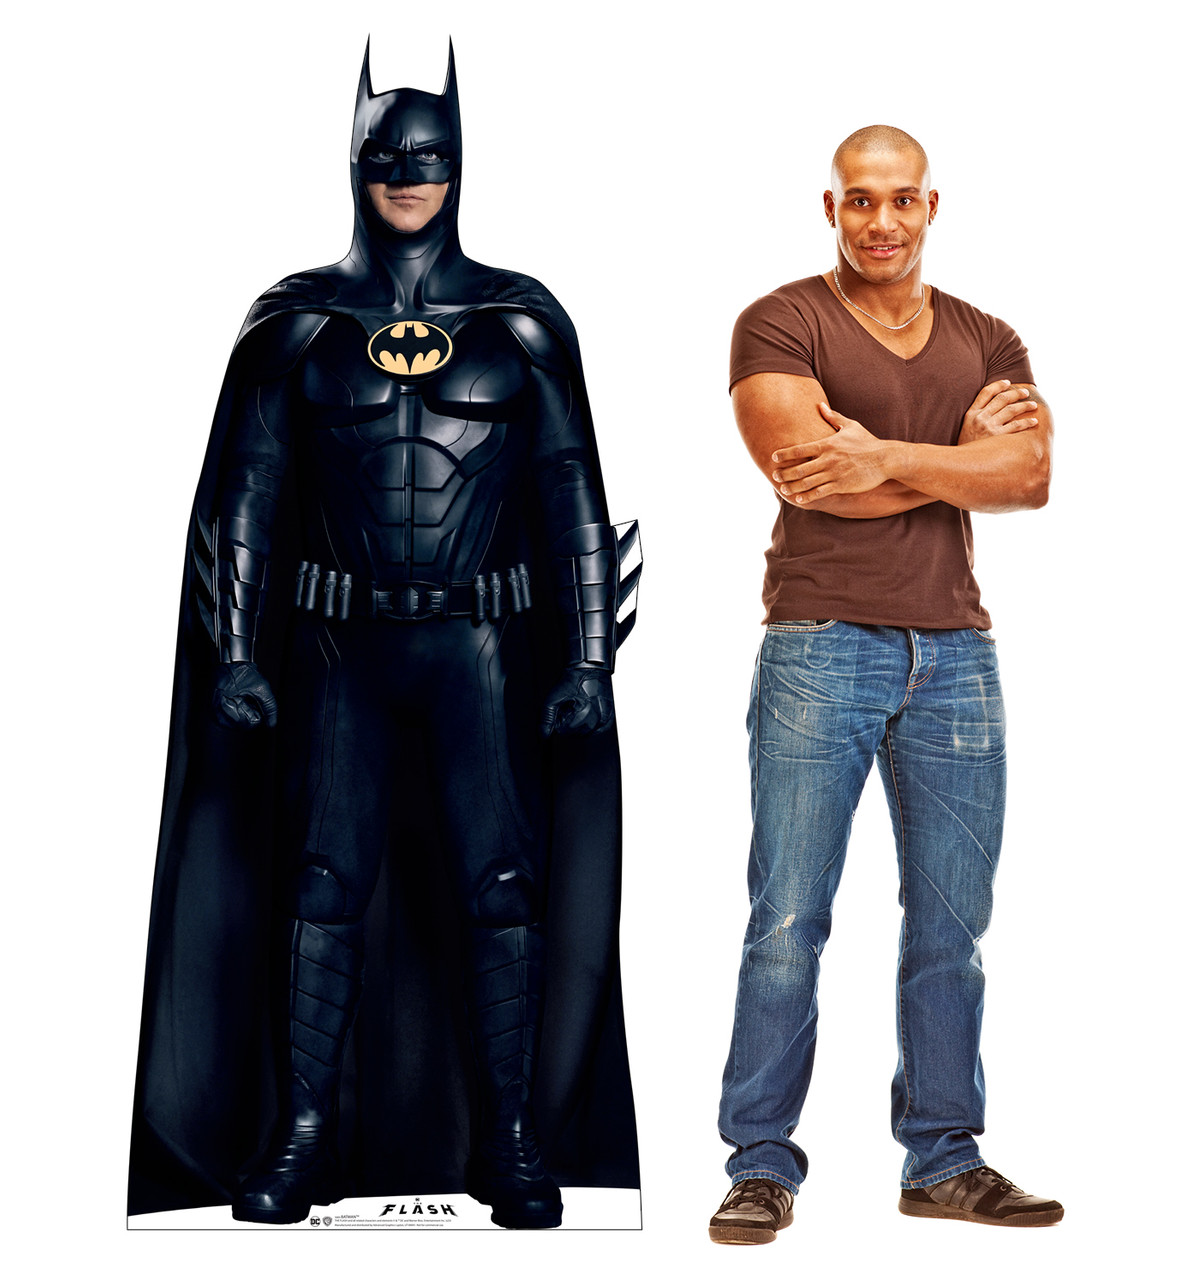 Life-size cardboard standee of Batman with model.